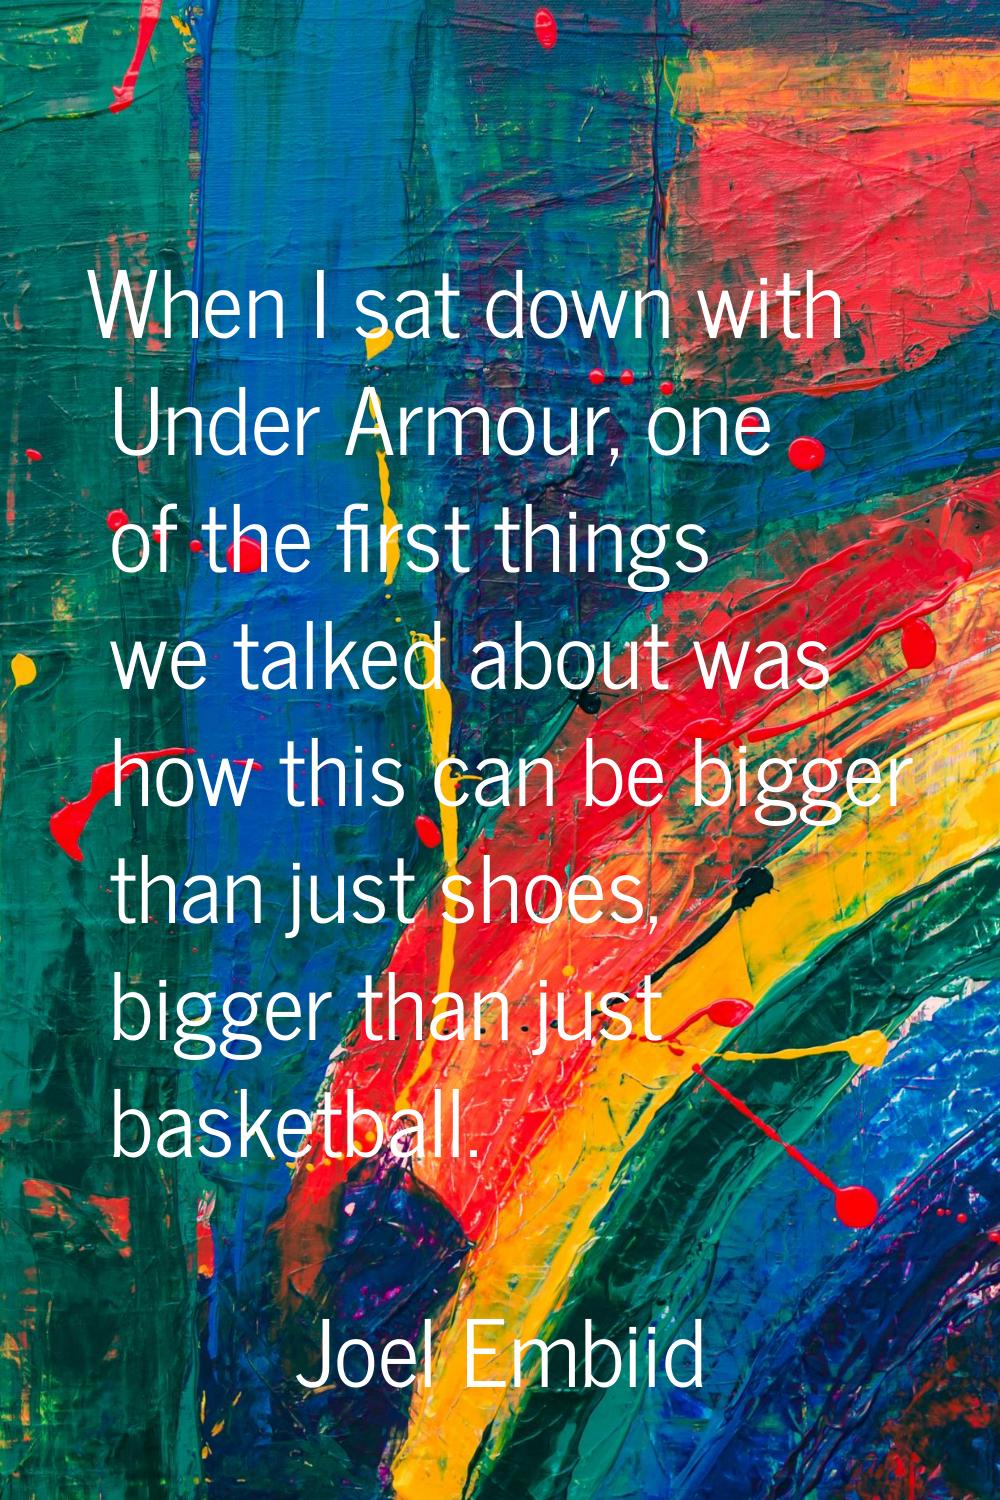 When I sat down with Under Armour, one of the first things we talked about was how this can be bigg